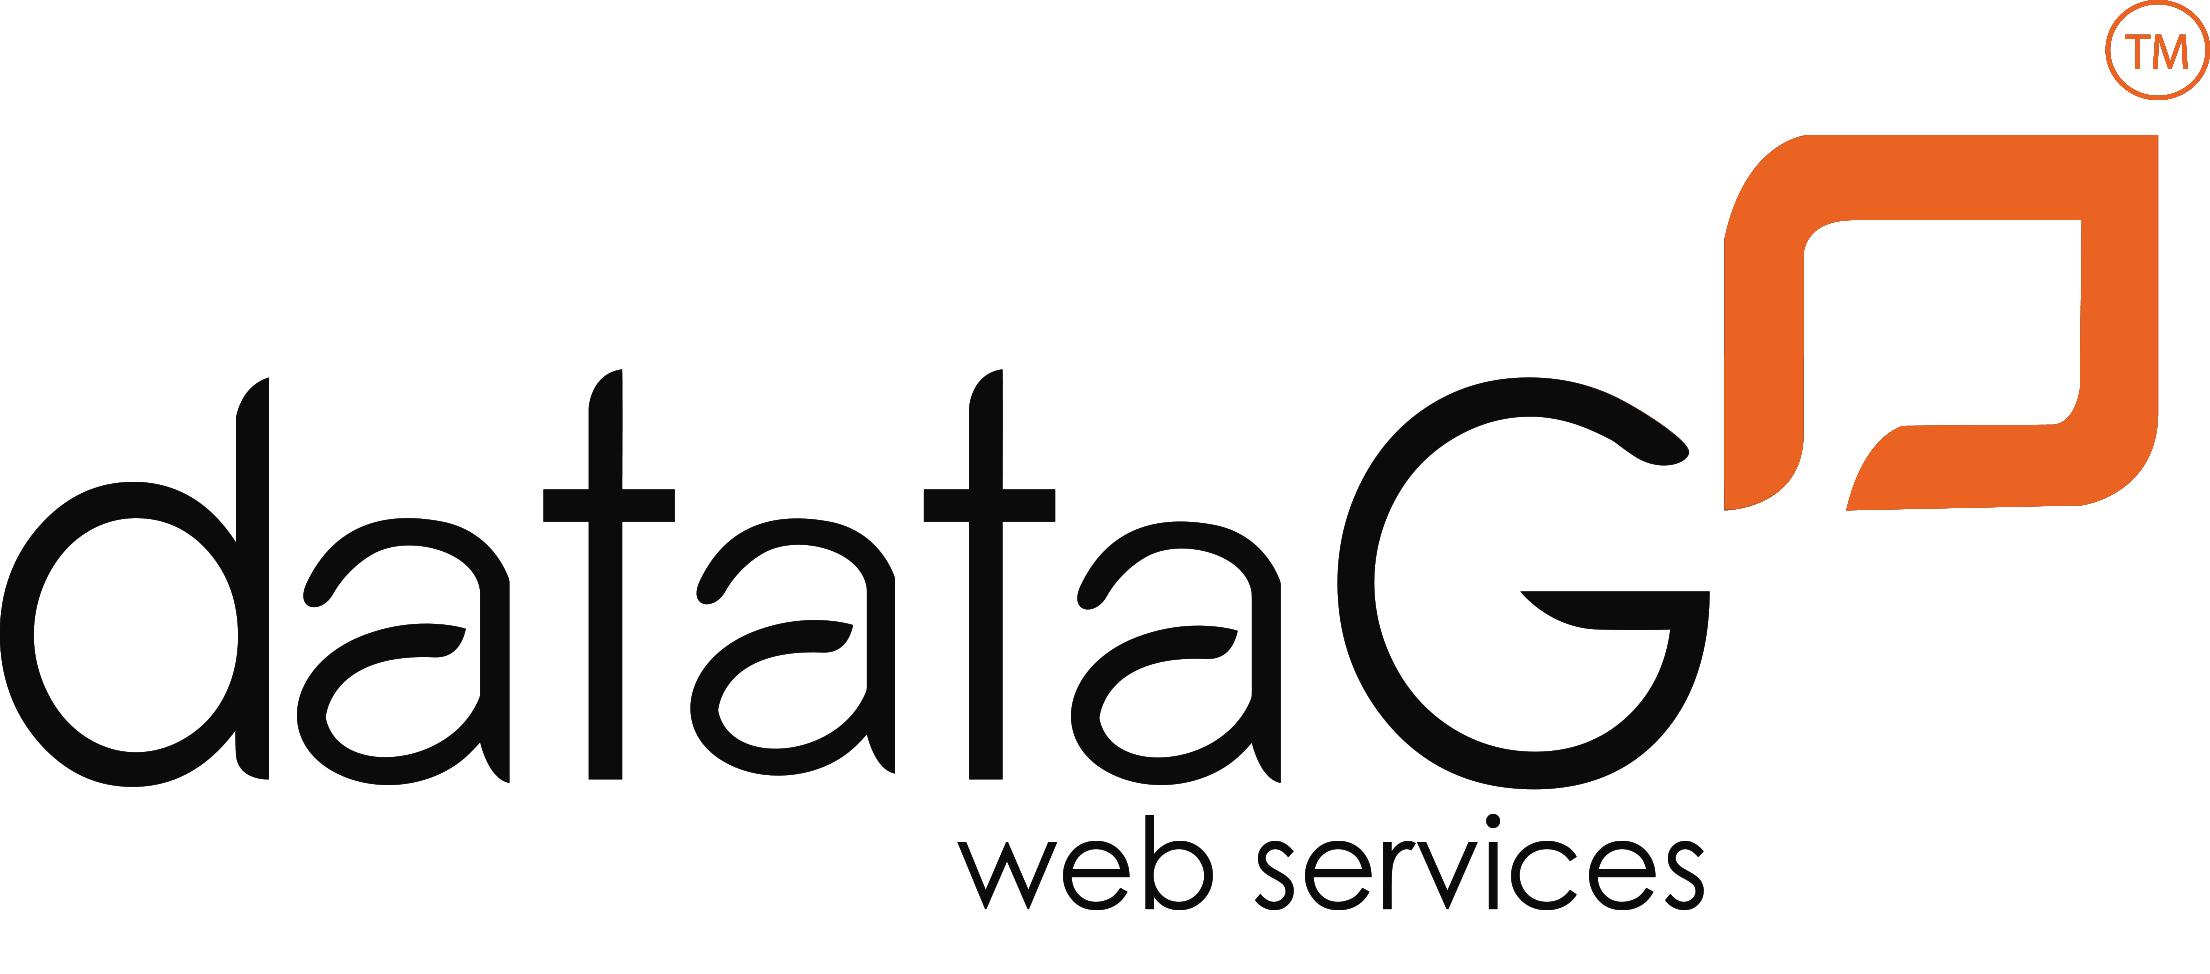 Datatag Web Services